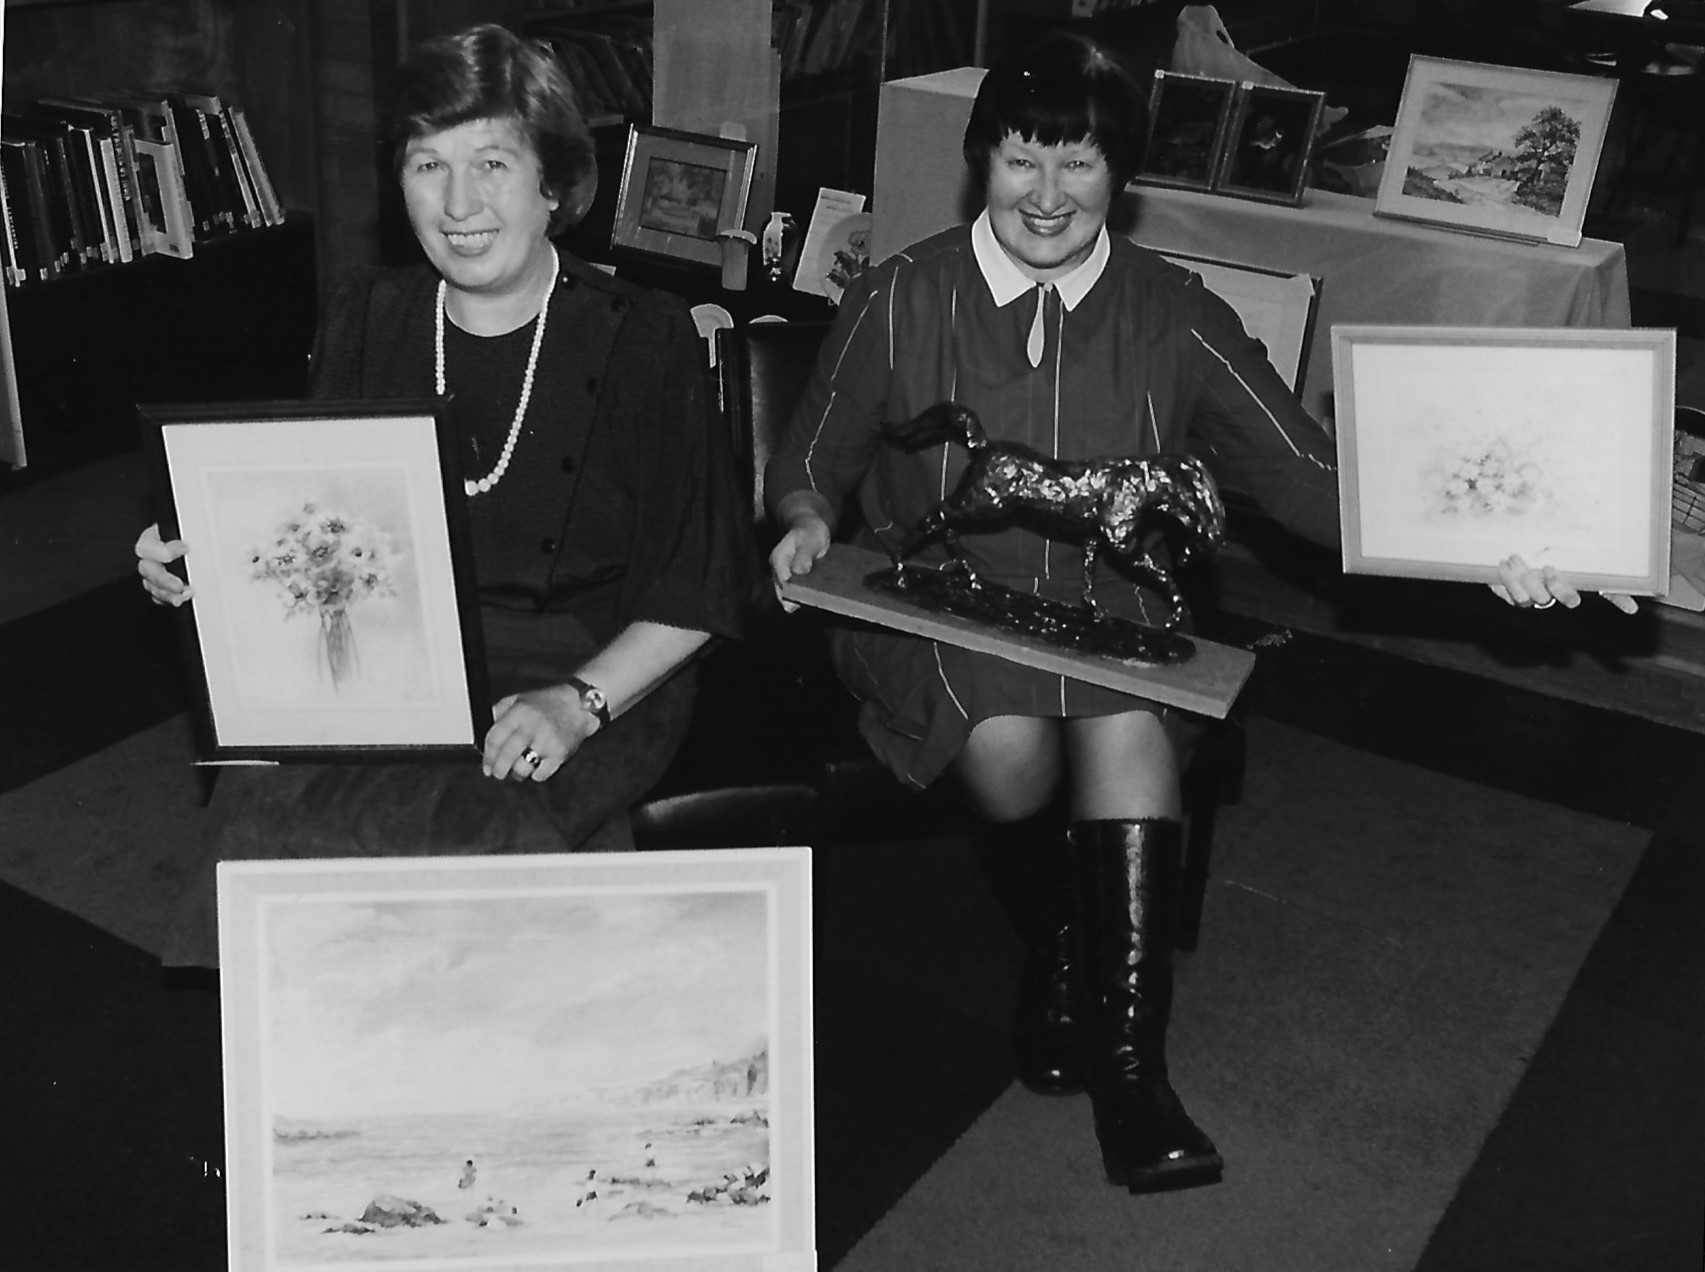 Southport in November 1994. Two artists stage an art exhibition in Ainsdale